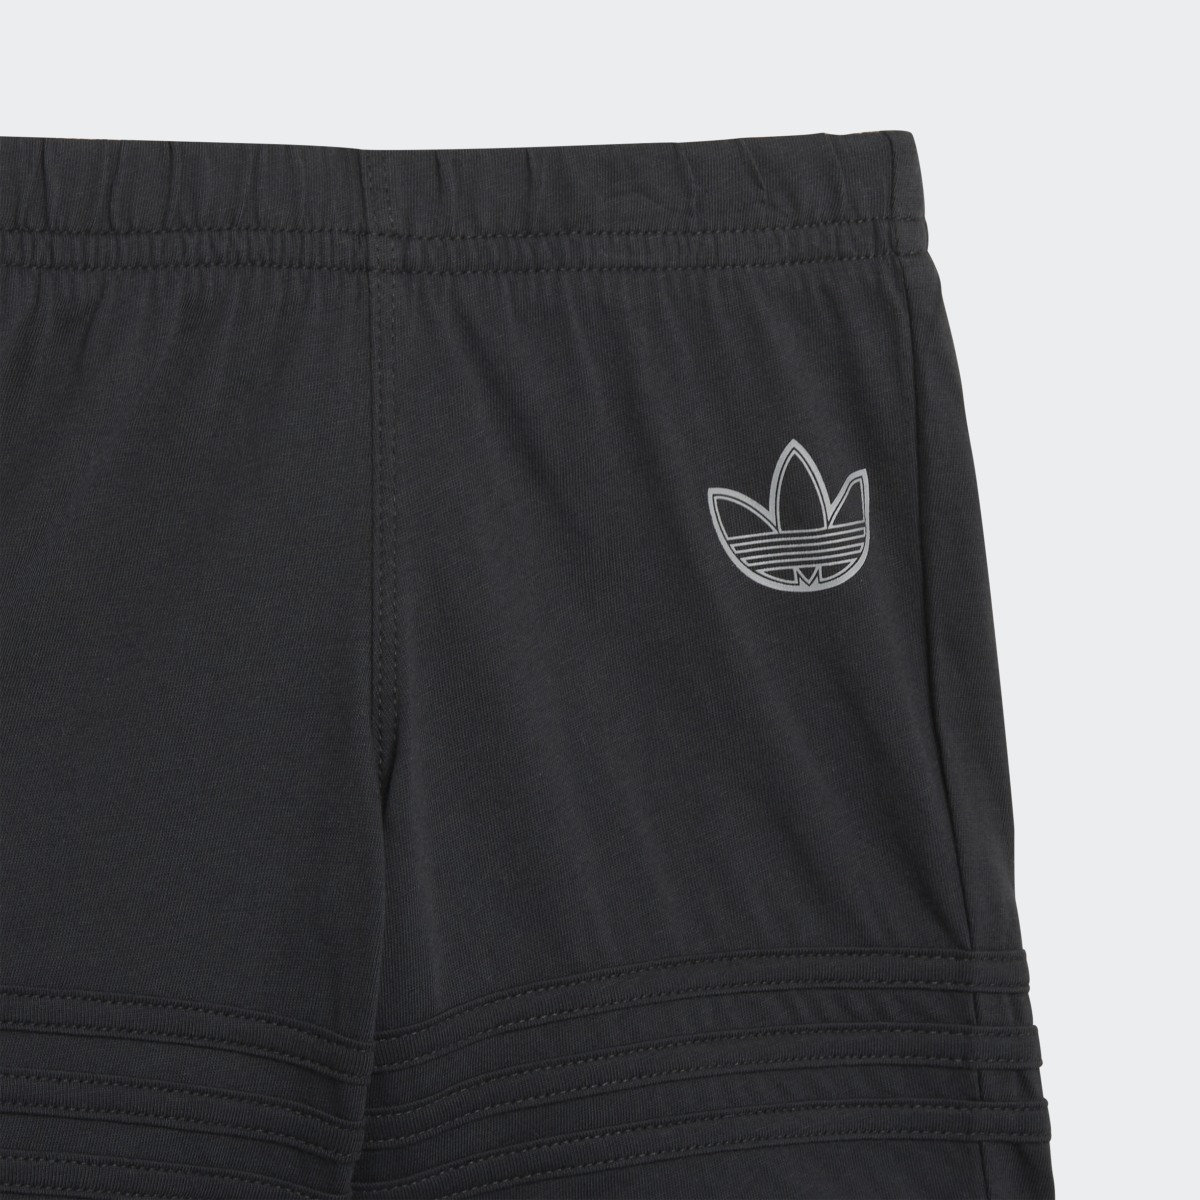 Adidas SPRT Collection Shorts and Tee Set. 9